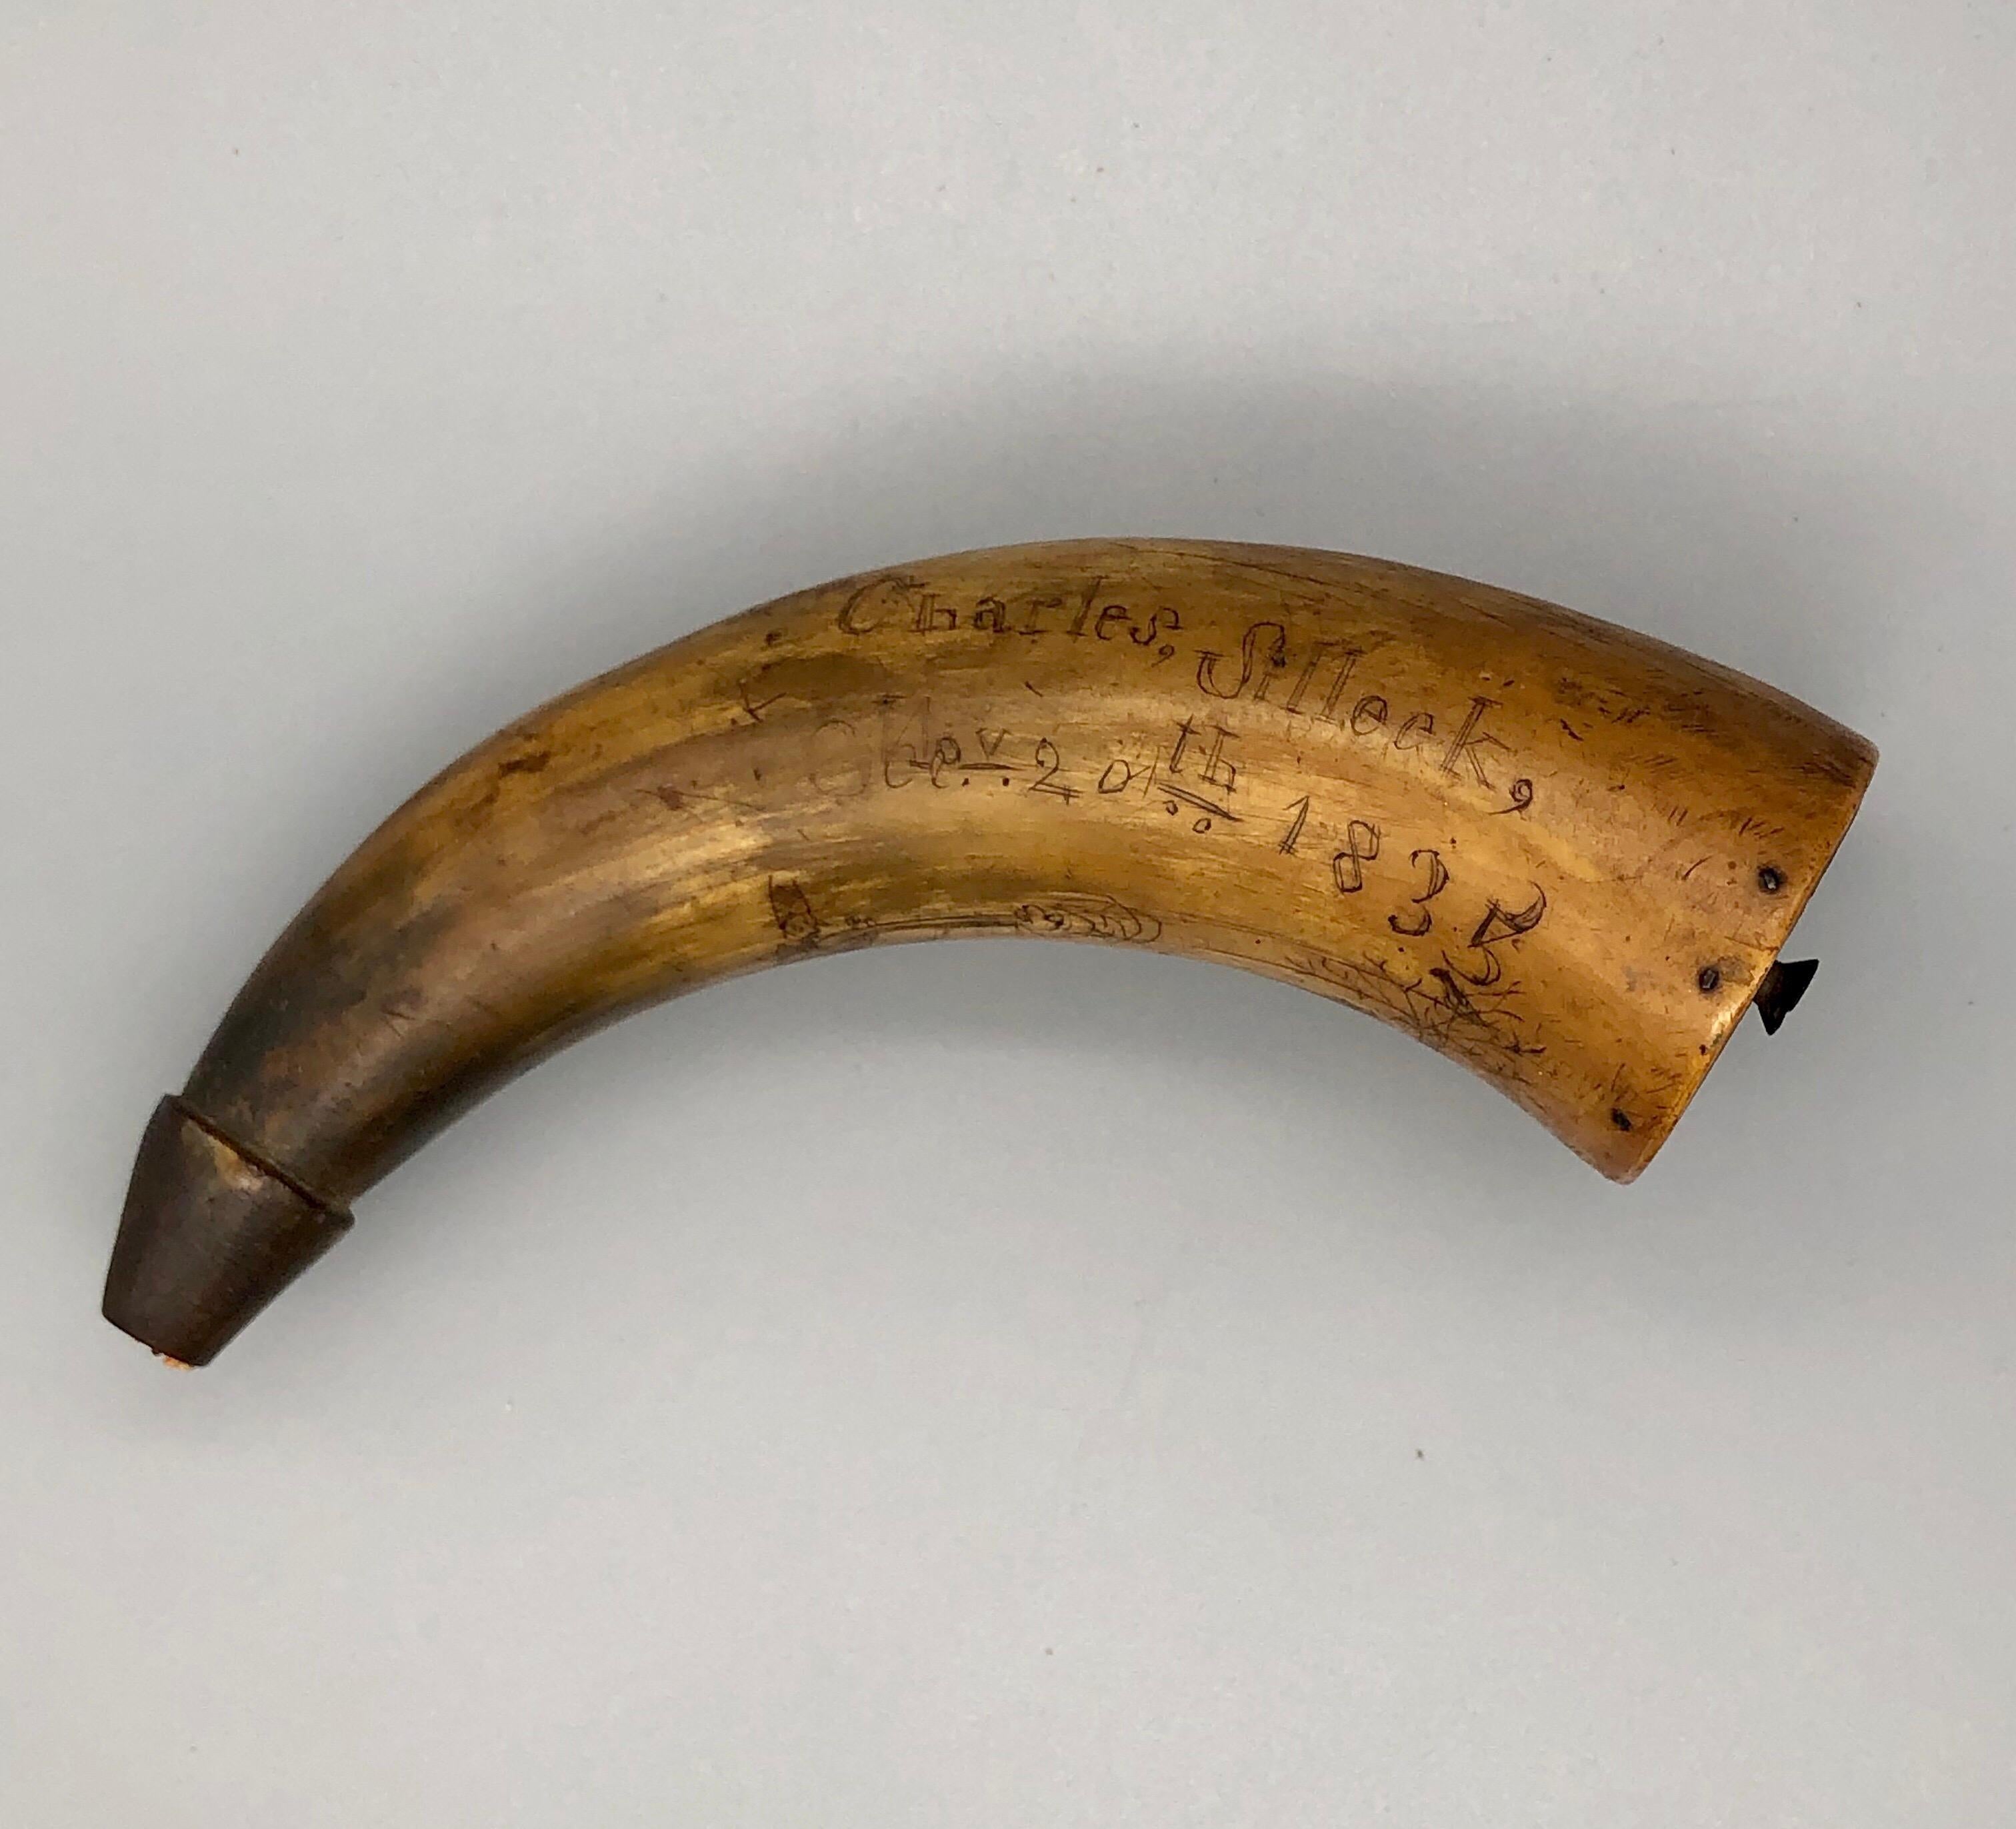 This rare find dates from 1835, nearly 30 years before the American Civil War. The horn is inscribed Charles Silleck, Nov 20th 1835. Below the inscription is a roughly drawn scene of a gentleman shooting a rifle at a bird in a tree, with a dog